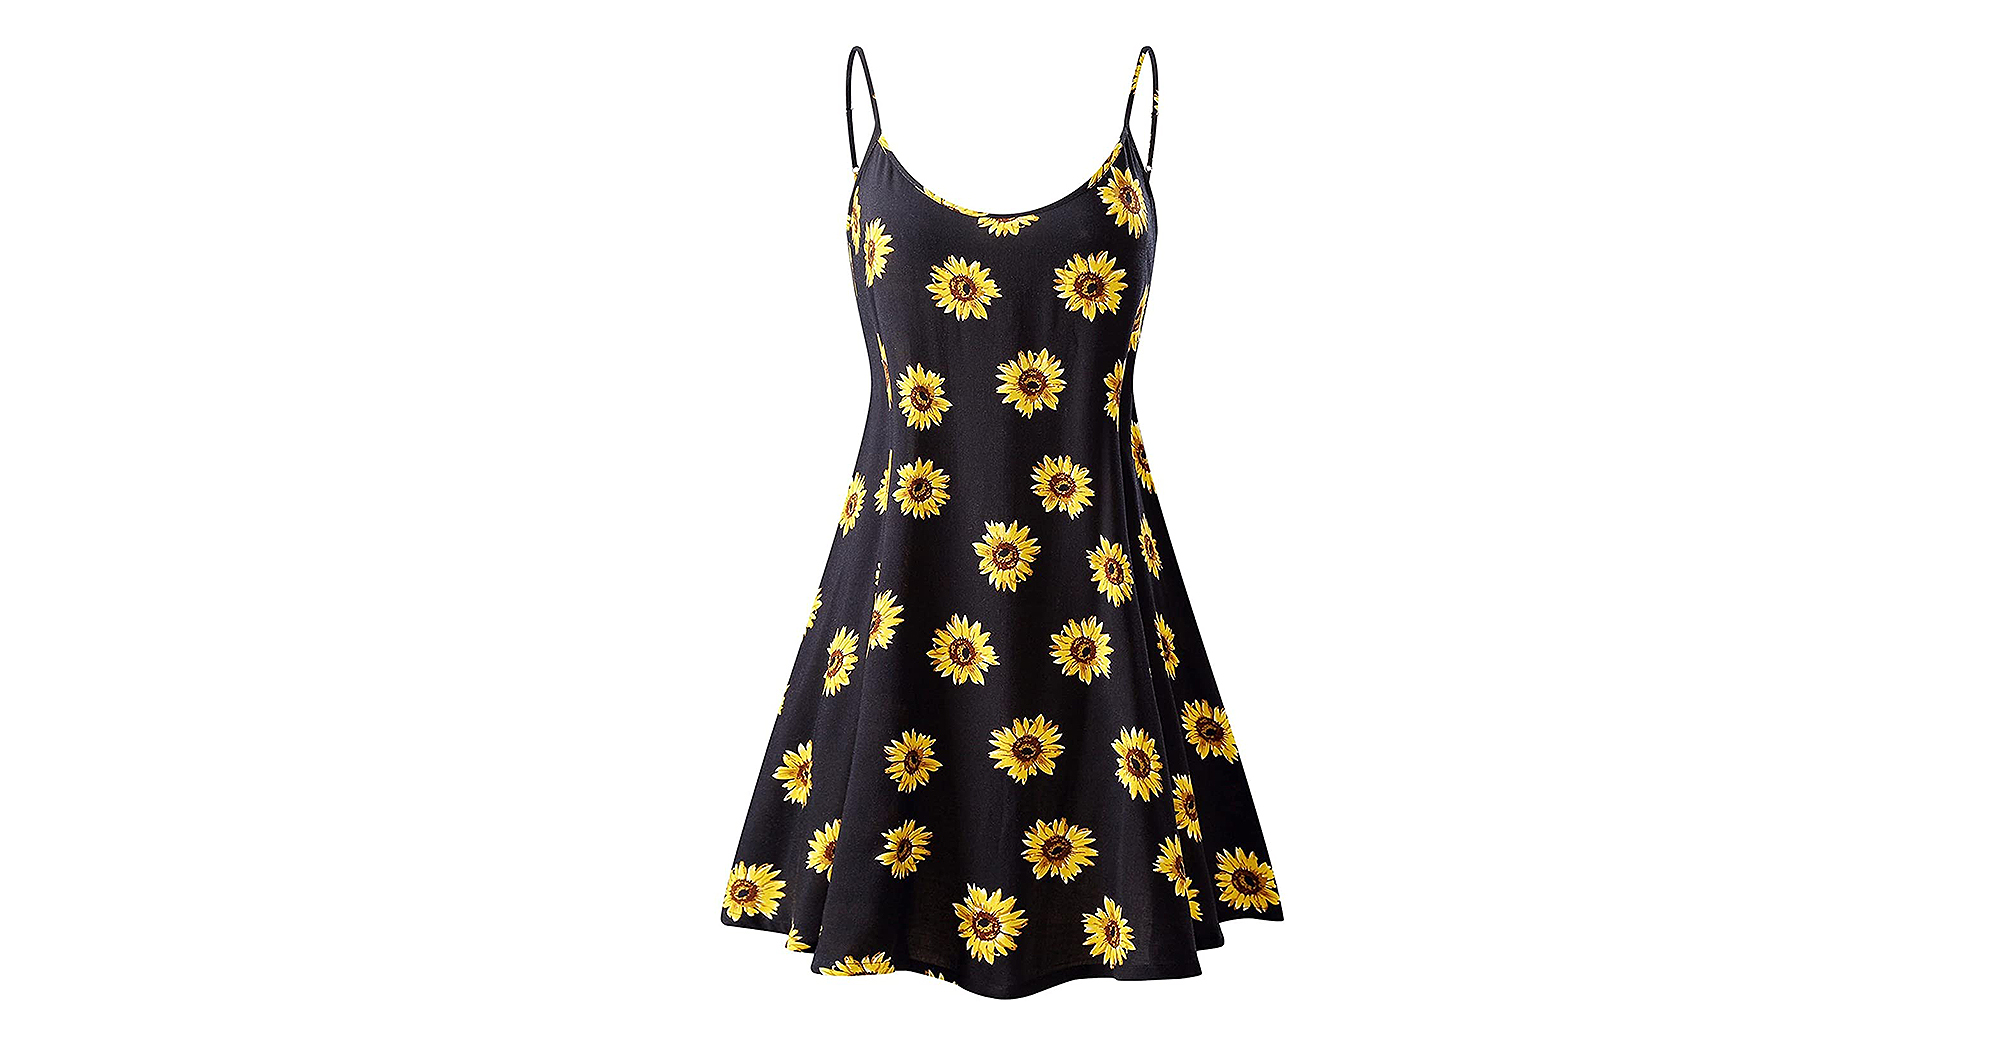 Amazon Sunflower Dress Is a Must for the 1st Day of Summer